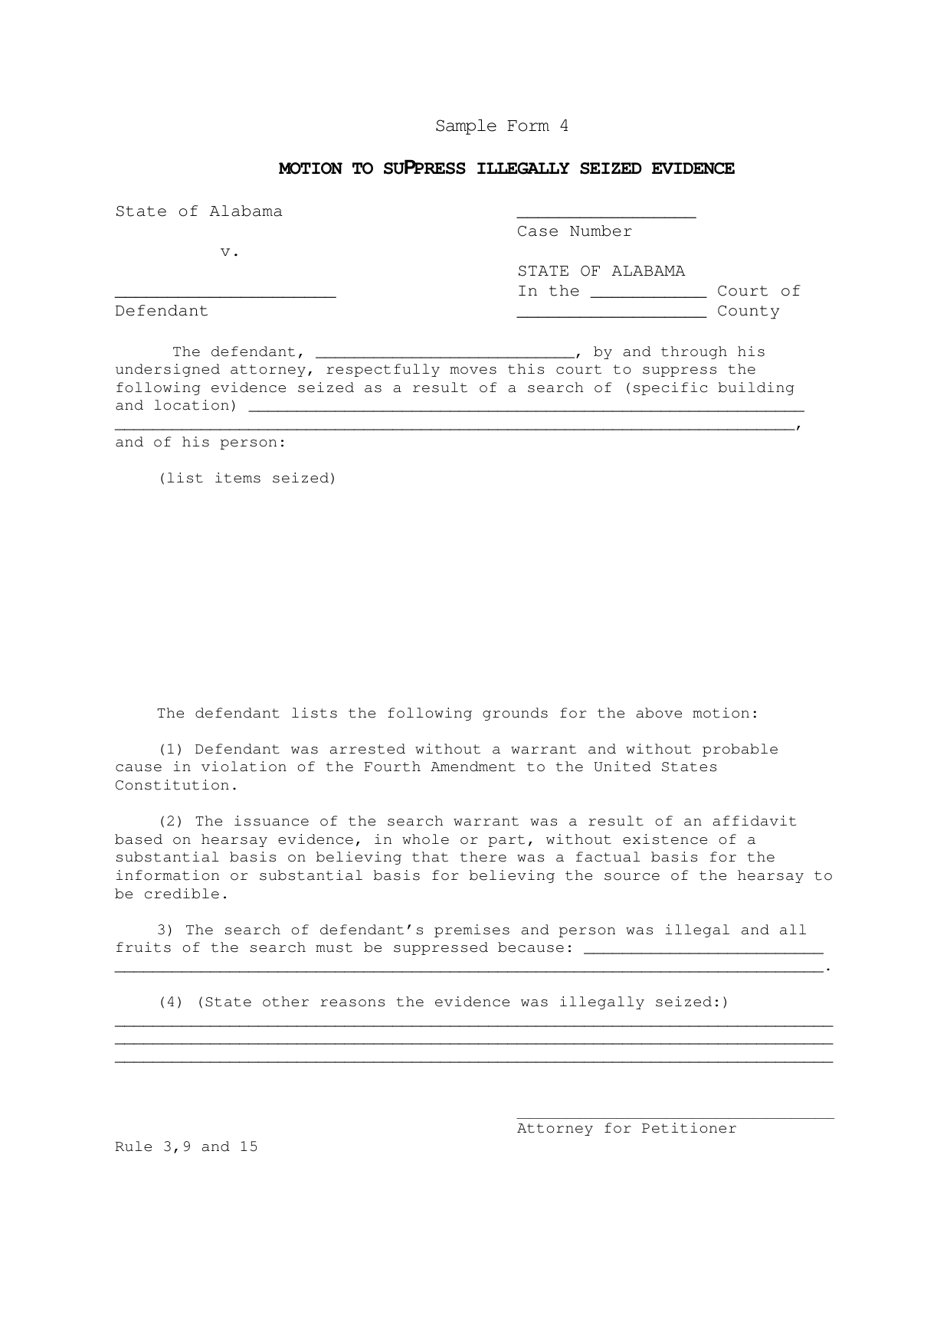 Sample Form 4 Motion to Suppress Illegally Seized Evidence - Alabama, Page 1